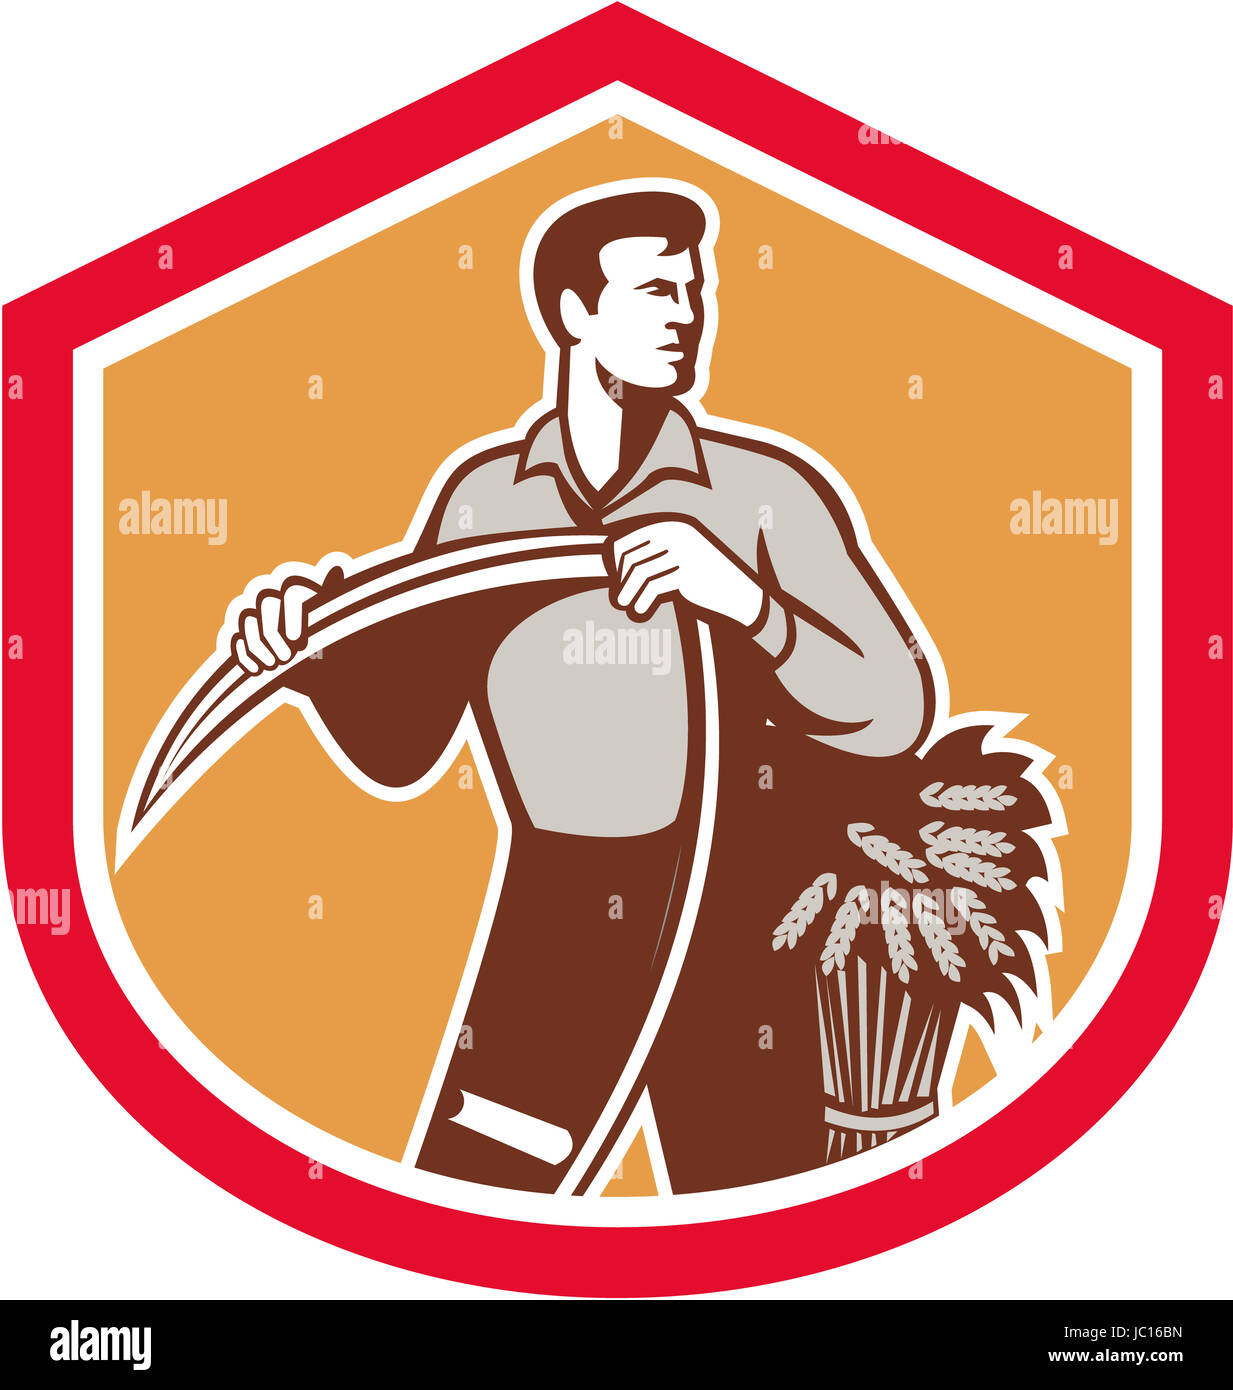 Illustration of an organic farmer farm worker holding scythe facing front with wheat set inside shield crest on isolated background done in retro style. Stock Photo